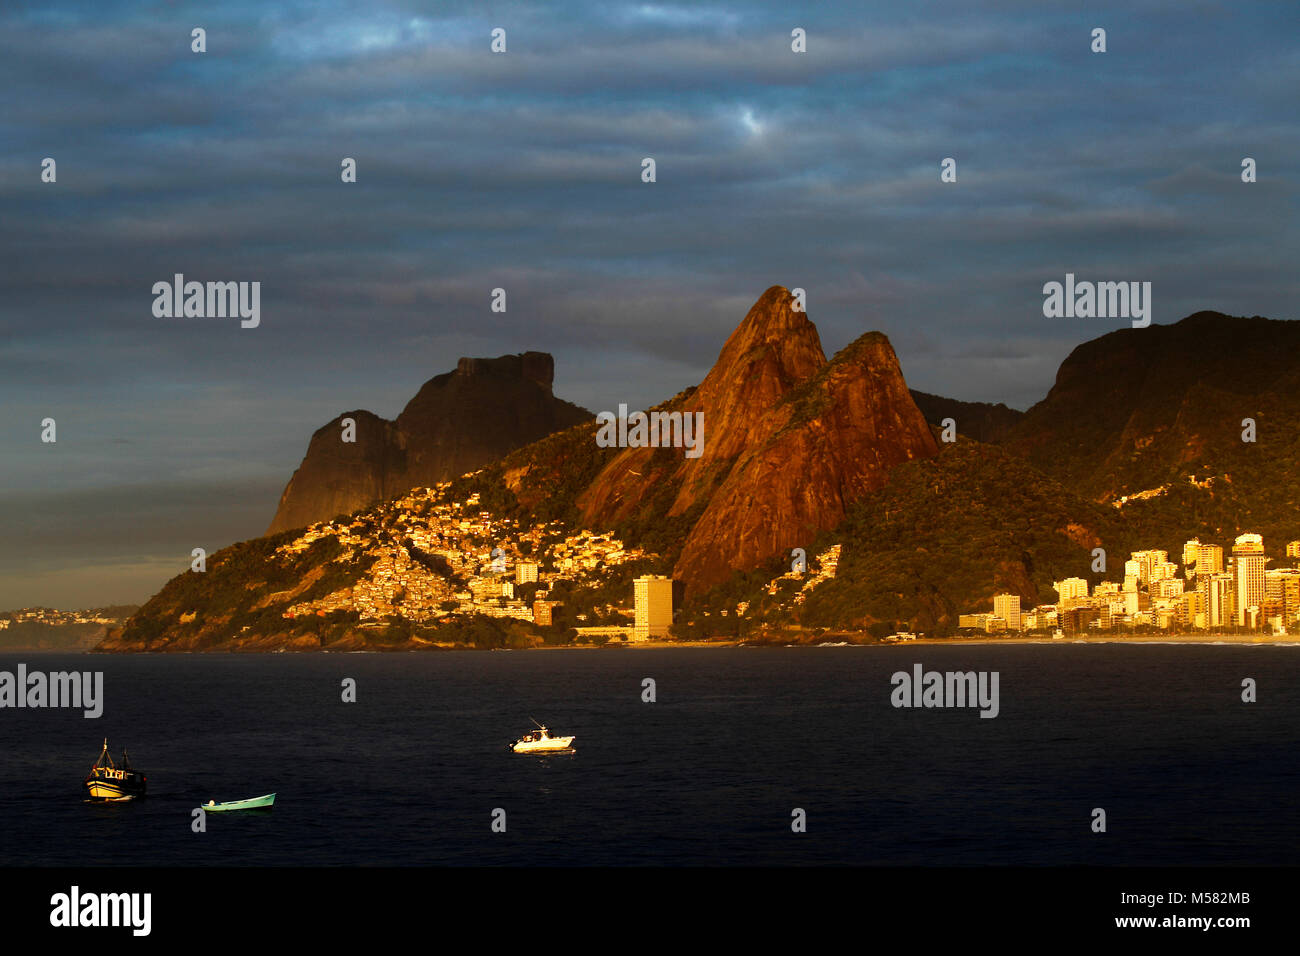 Early morning fishermans boats at ipanema beach, with Two Brother Hills, Pedra da Gavea and Vidigal favela in the background, Rio de Janeiro, Brazil Stock Photo